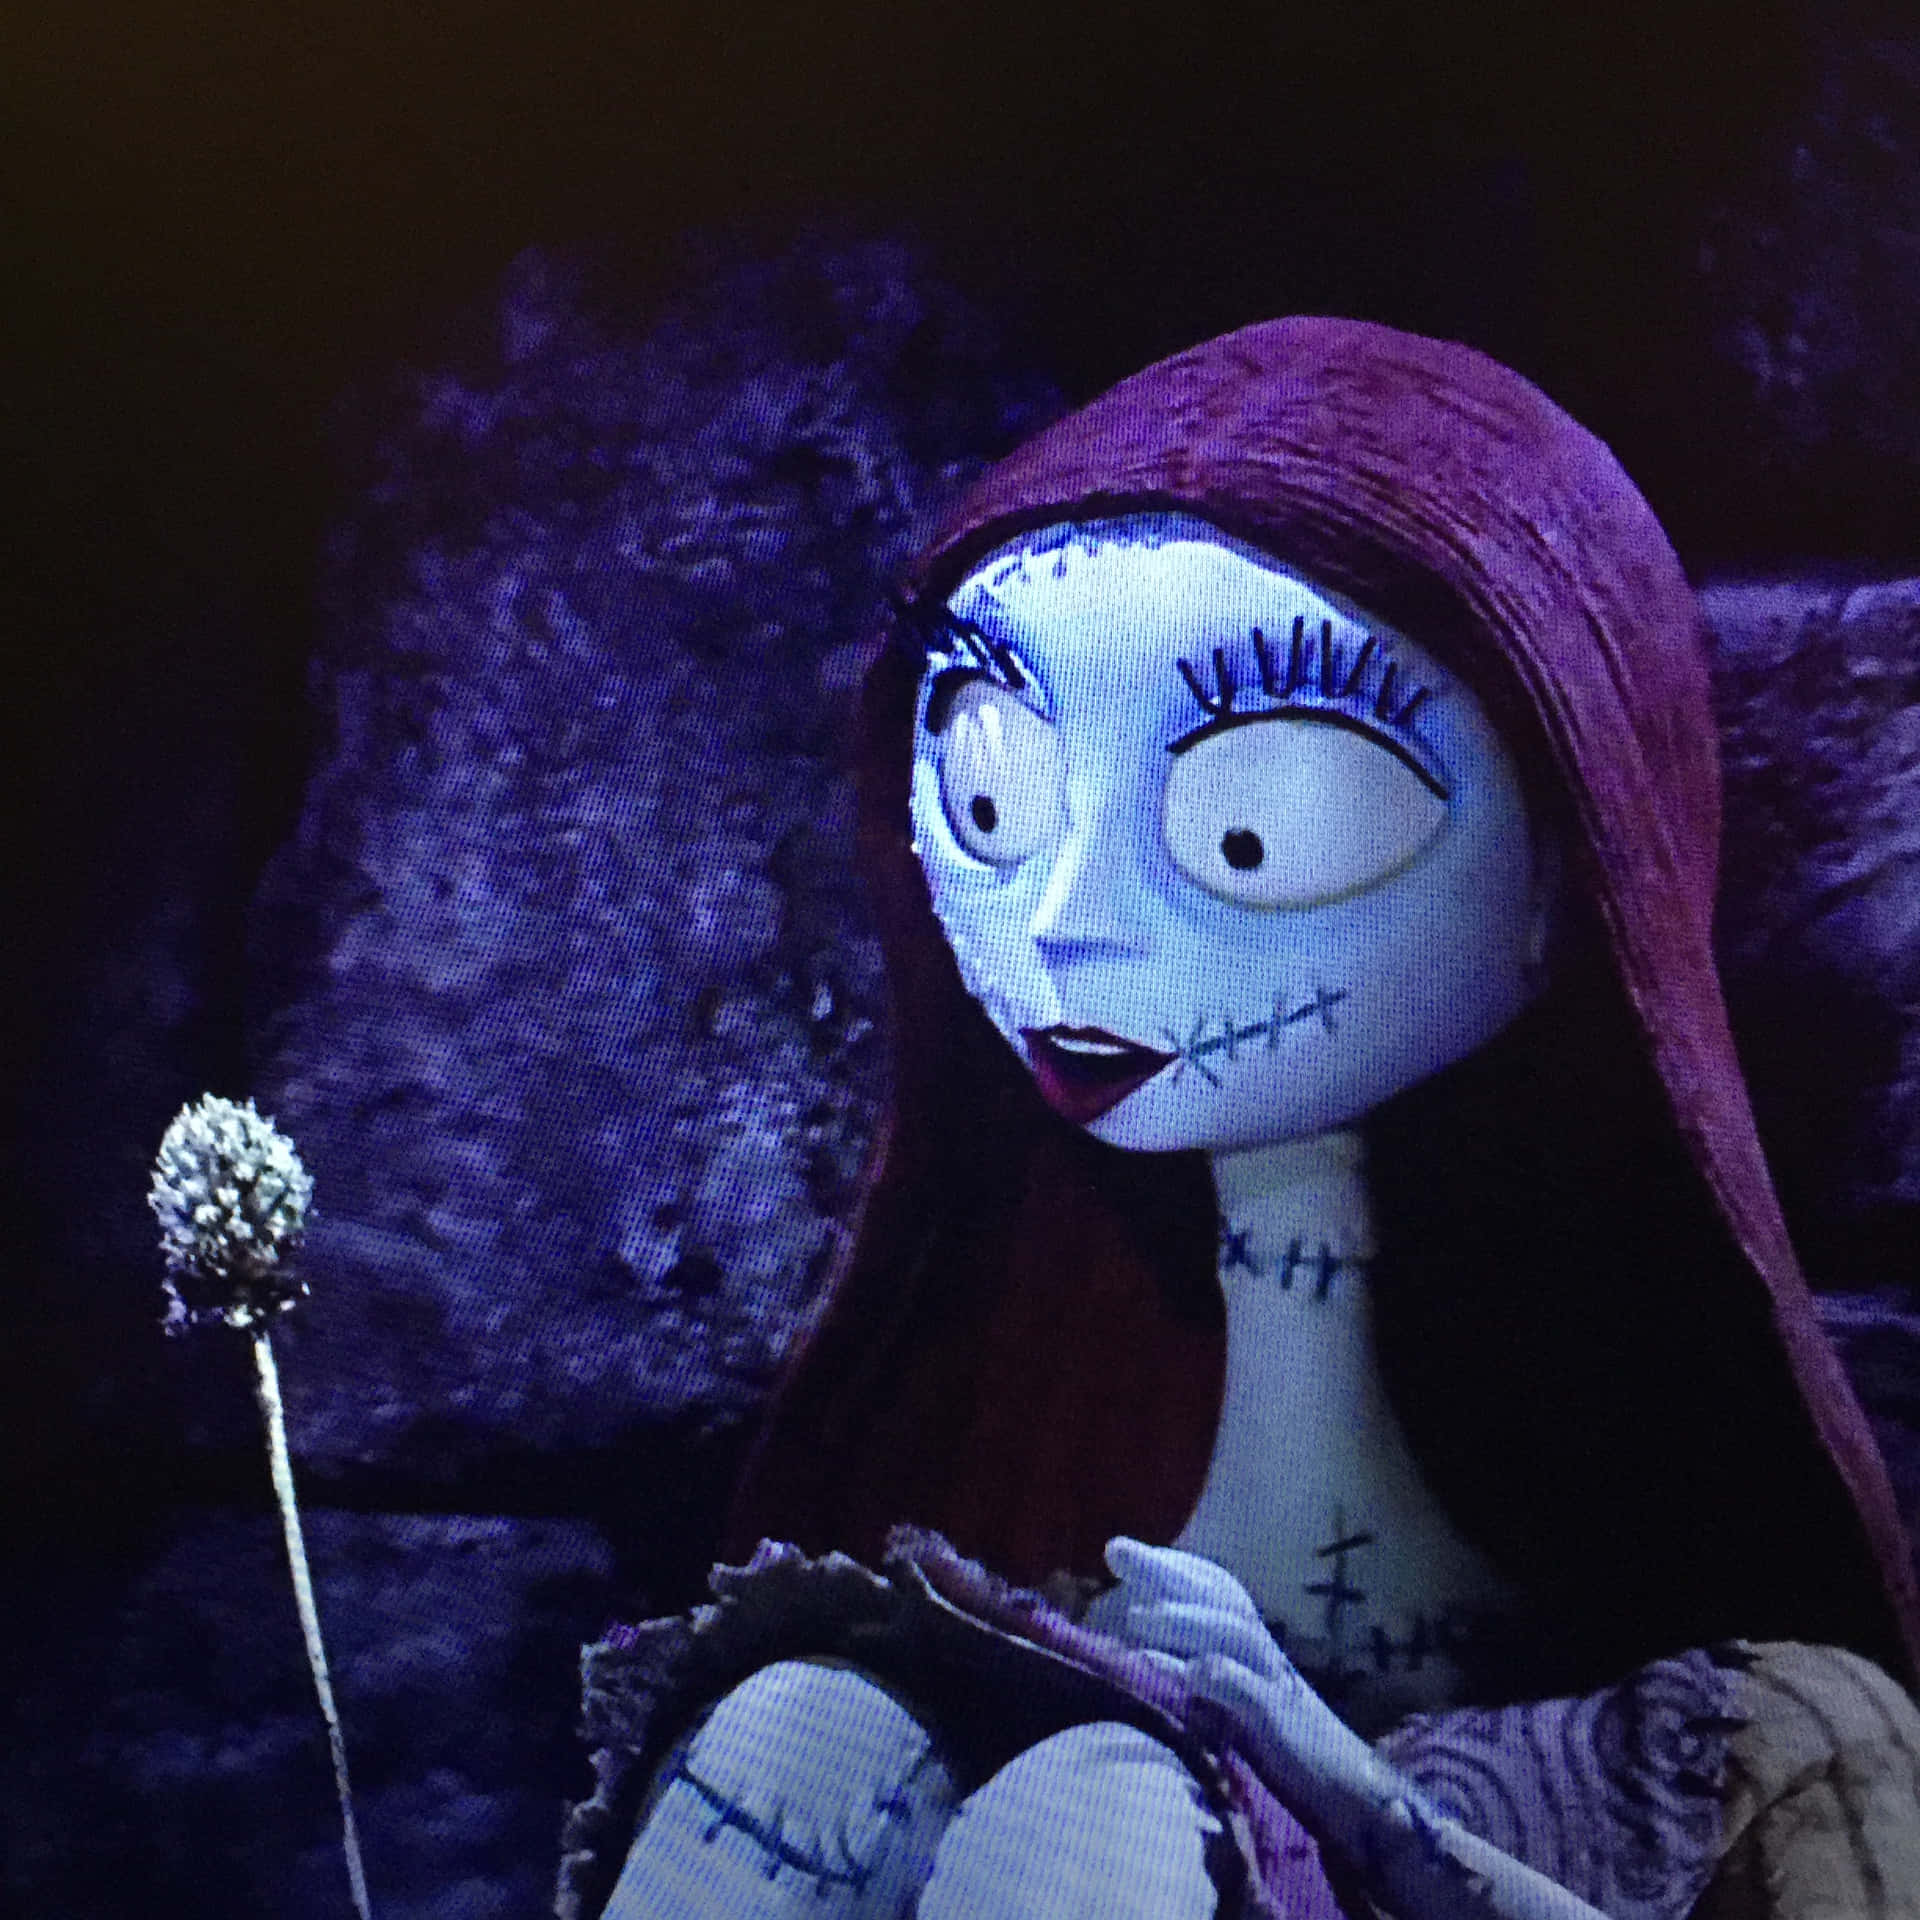 Sally_with_ Dead_ Flower_ Nightmare_ Before_ Christmas Wallpaper